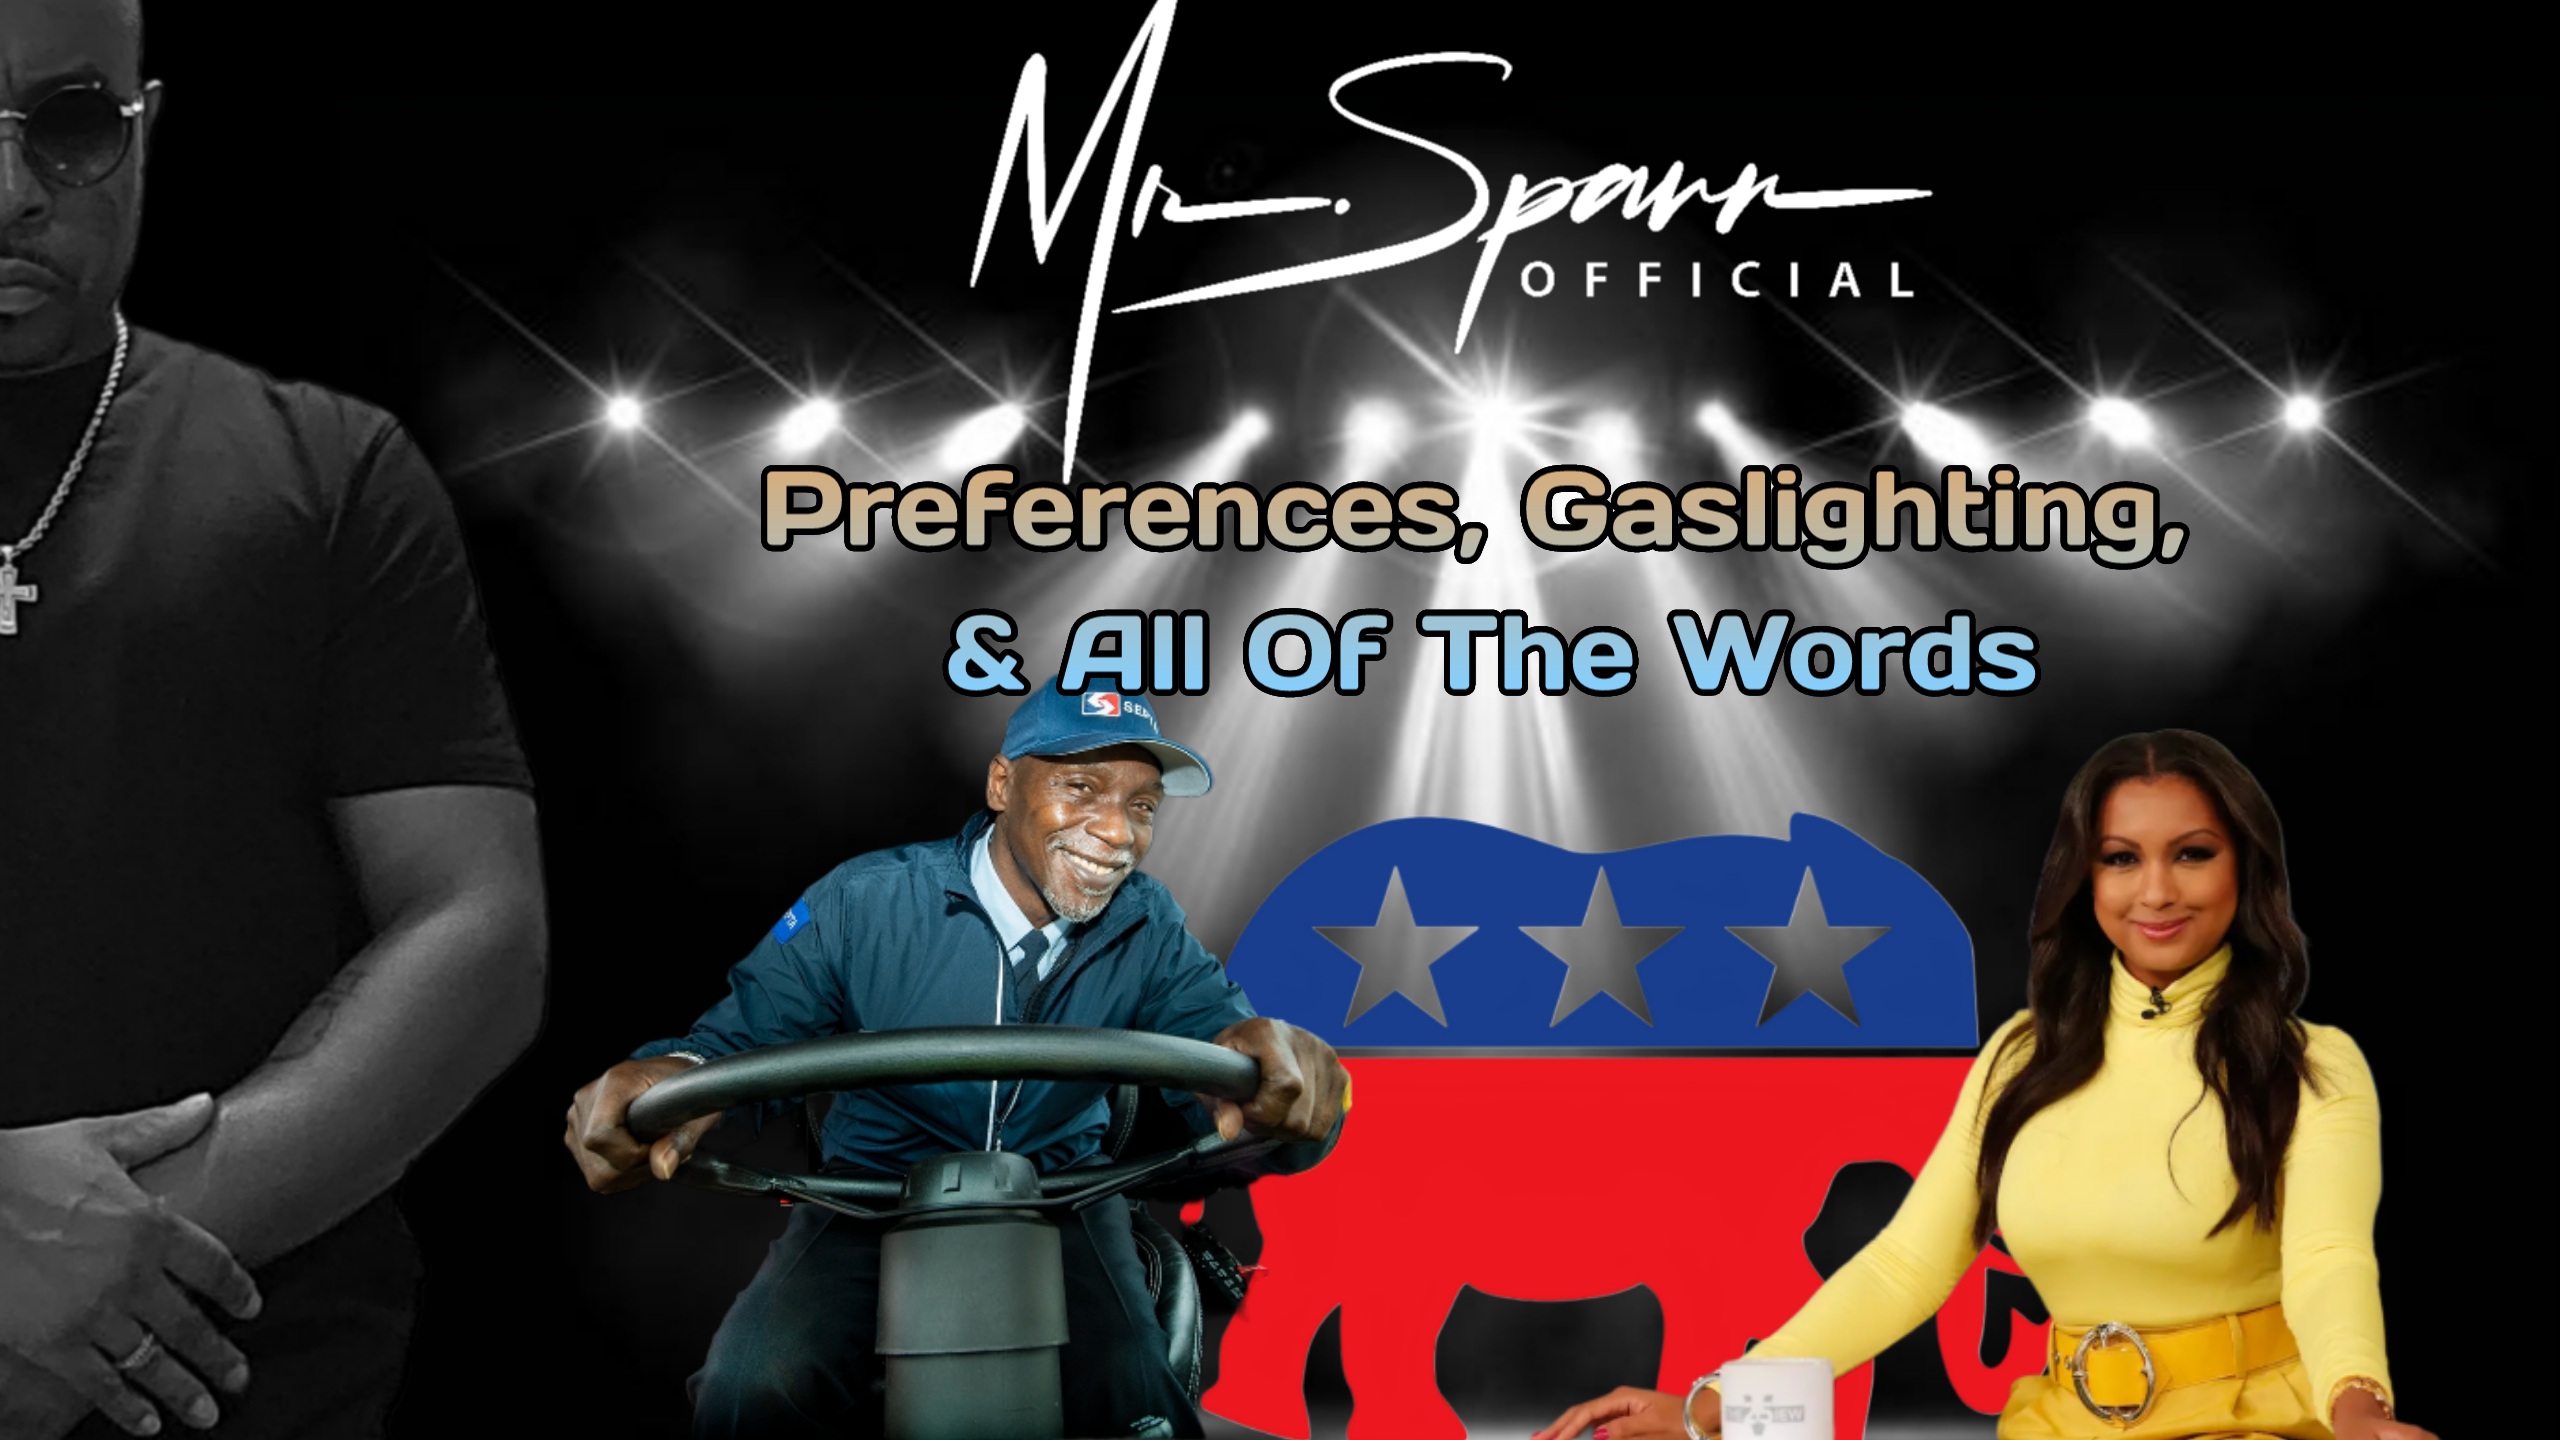 (Ep. 9) #MSO “Preferences, Gaslighting, & All Of The Words”